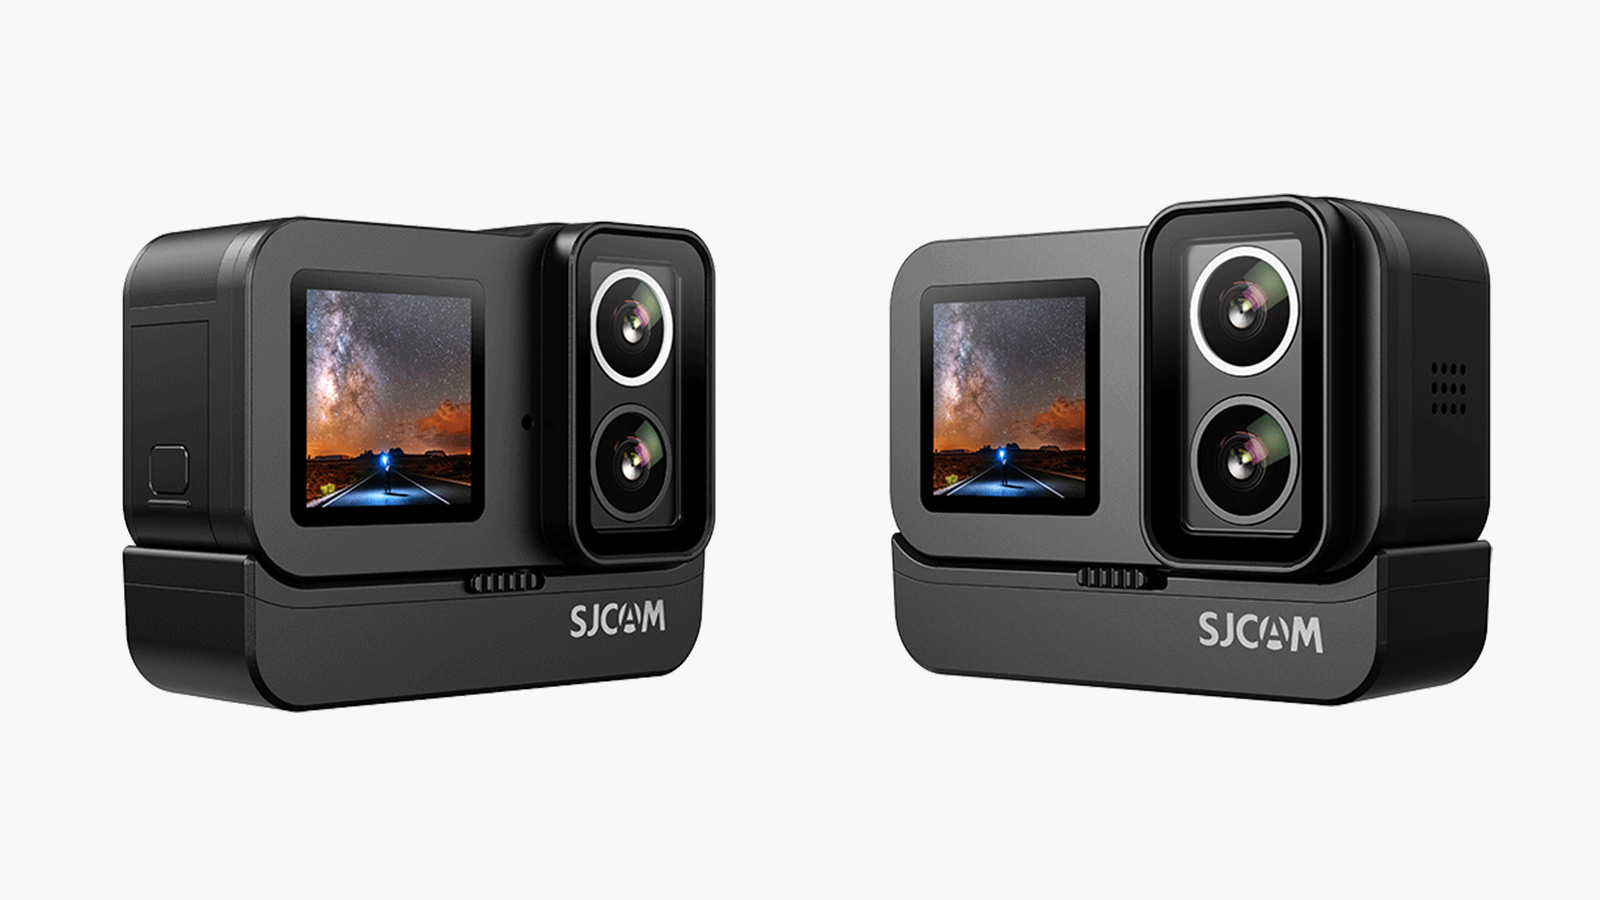 The SJ20 Dual-Lens Action Camera is the world's first action cam